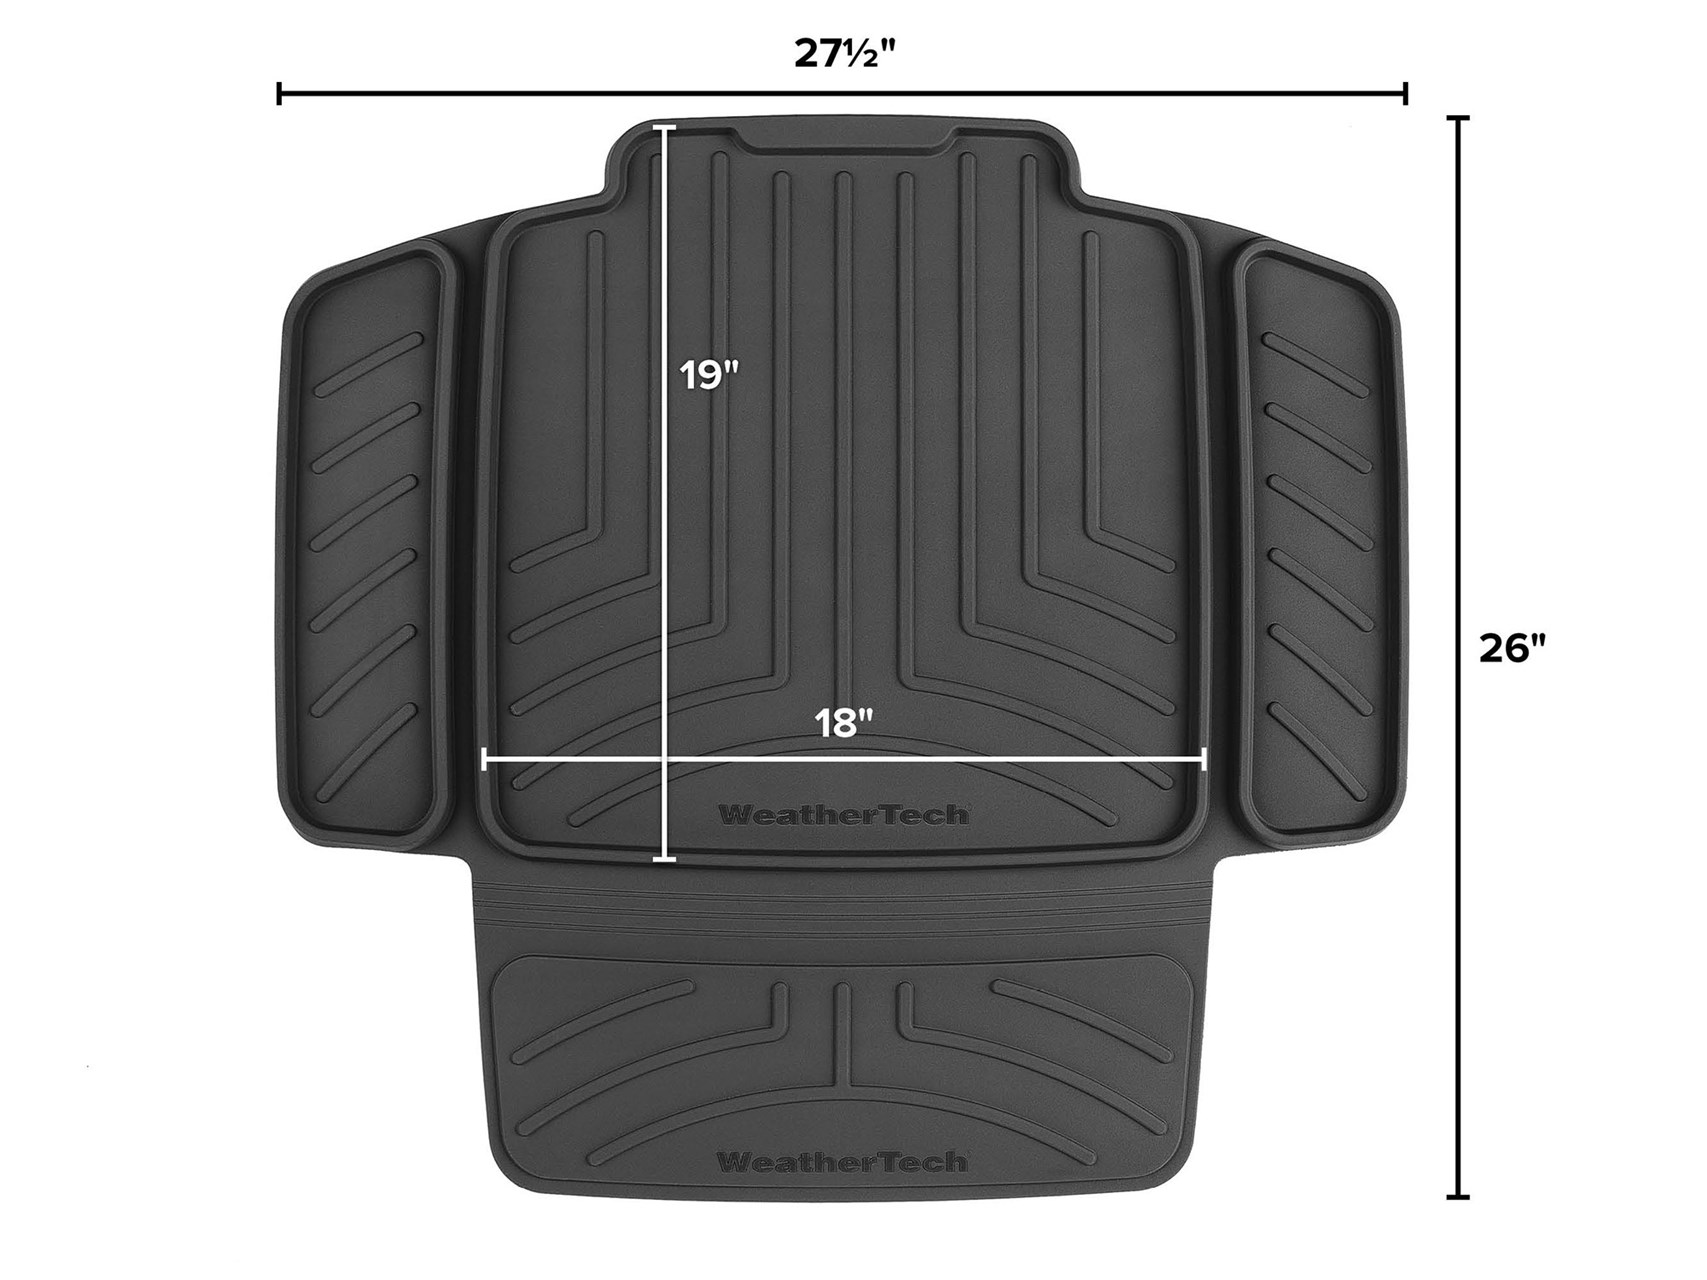 Ford Bronco PARENTS  WeatherTech for Car Seats or Misc Uses Child_Car_Seat_Protector_Dimensions_Diagram_2000